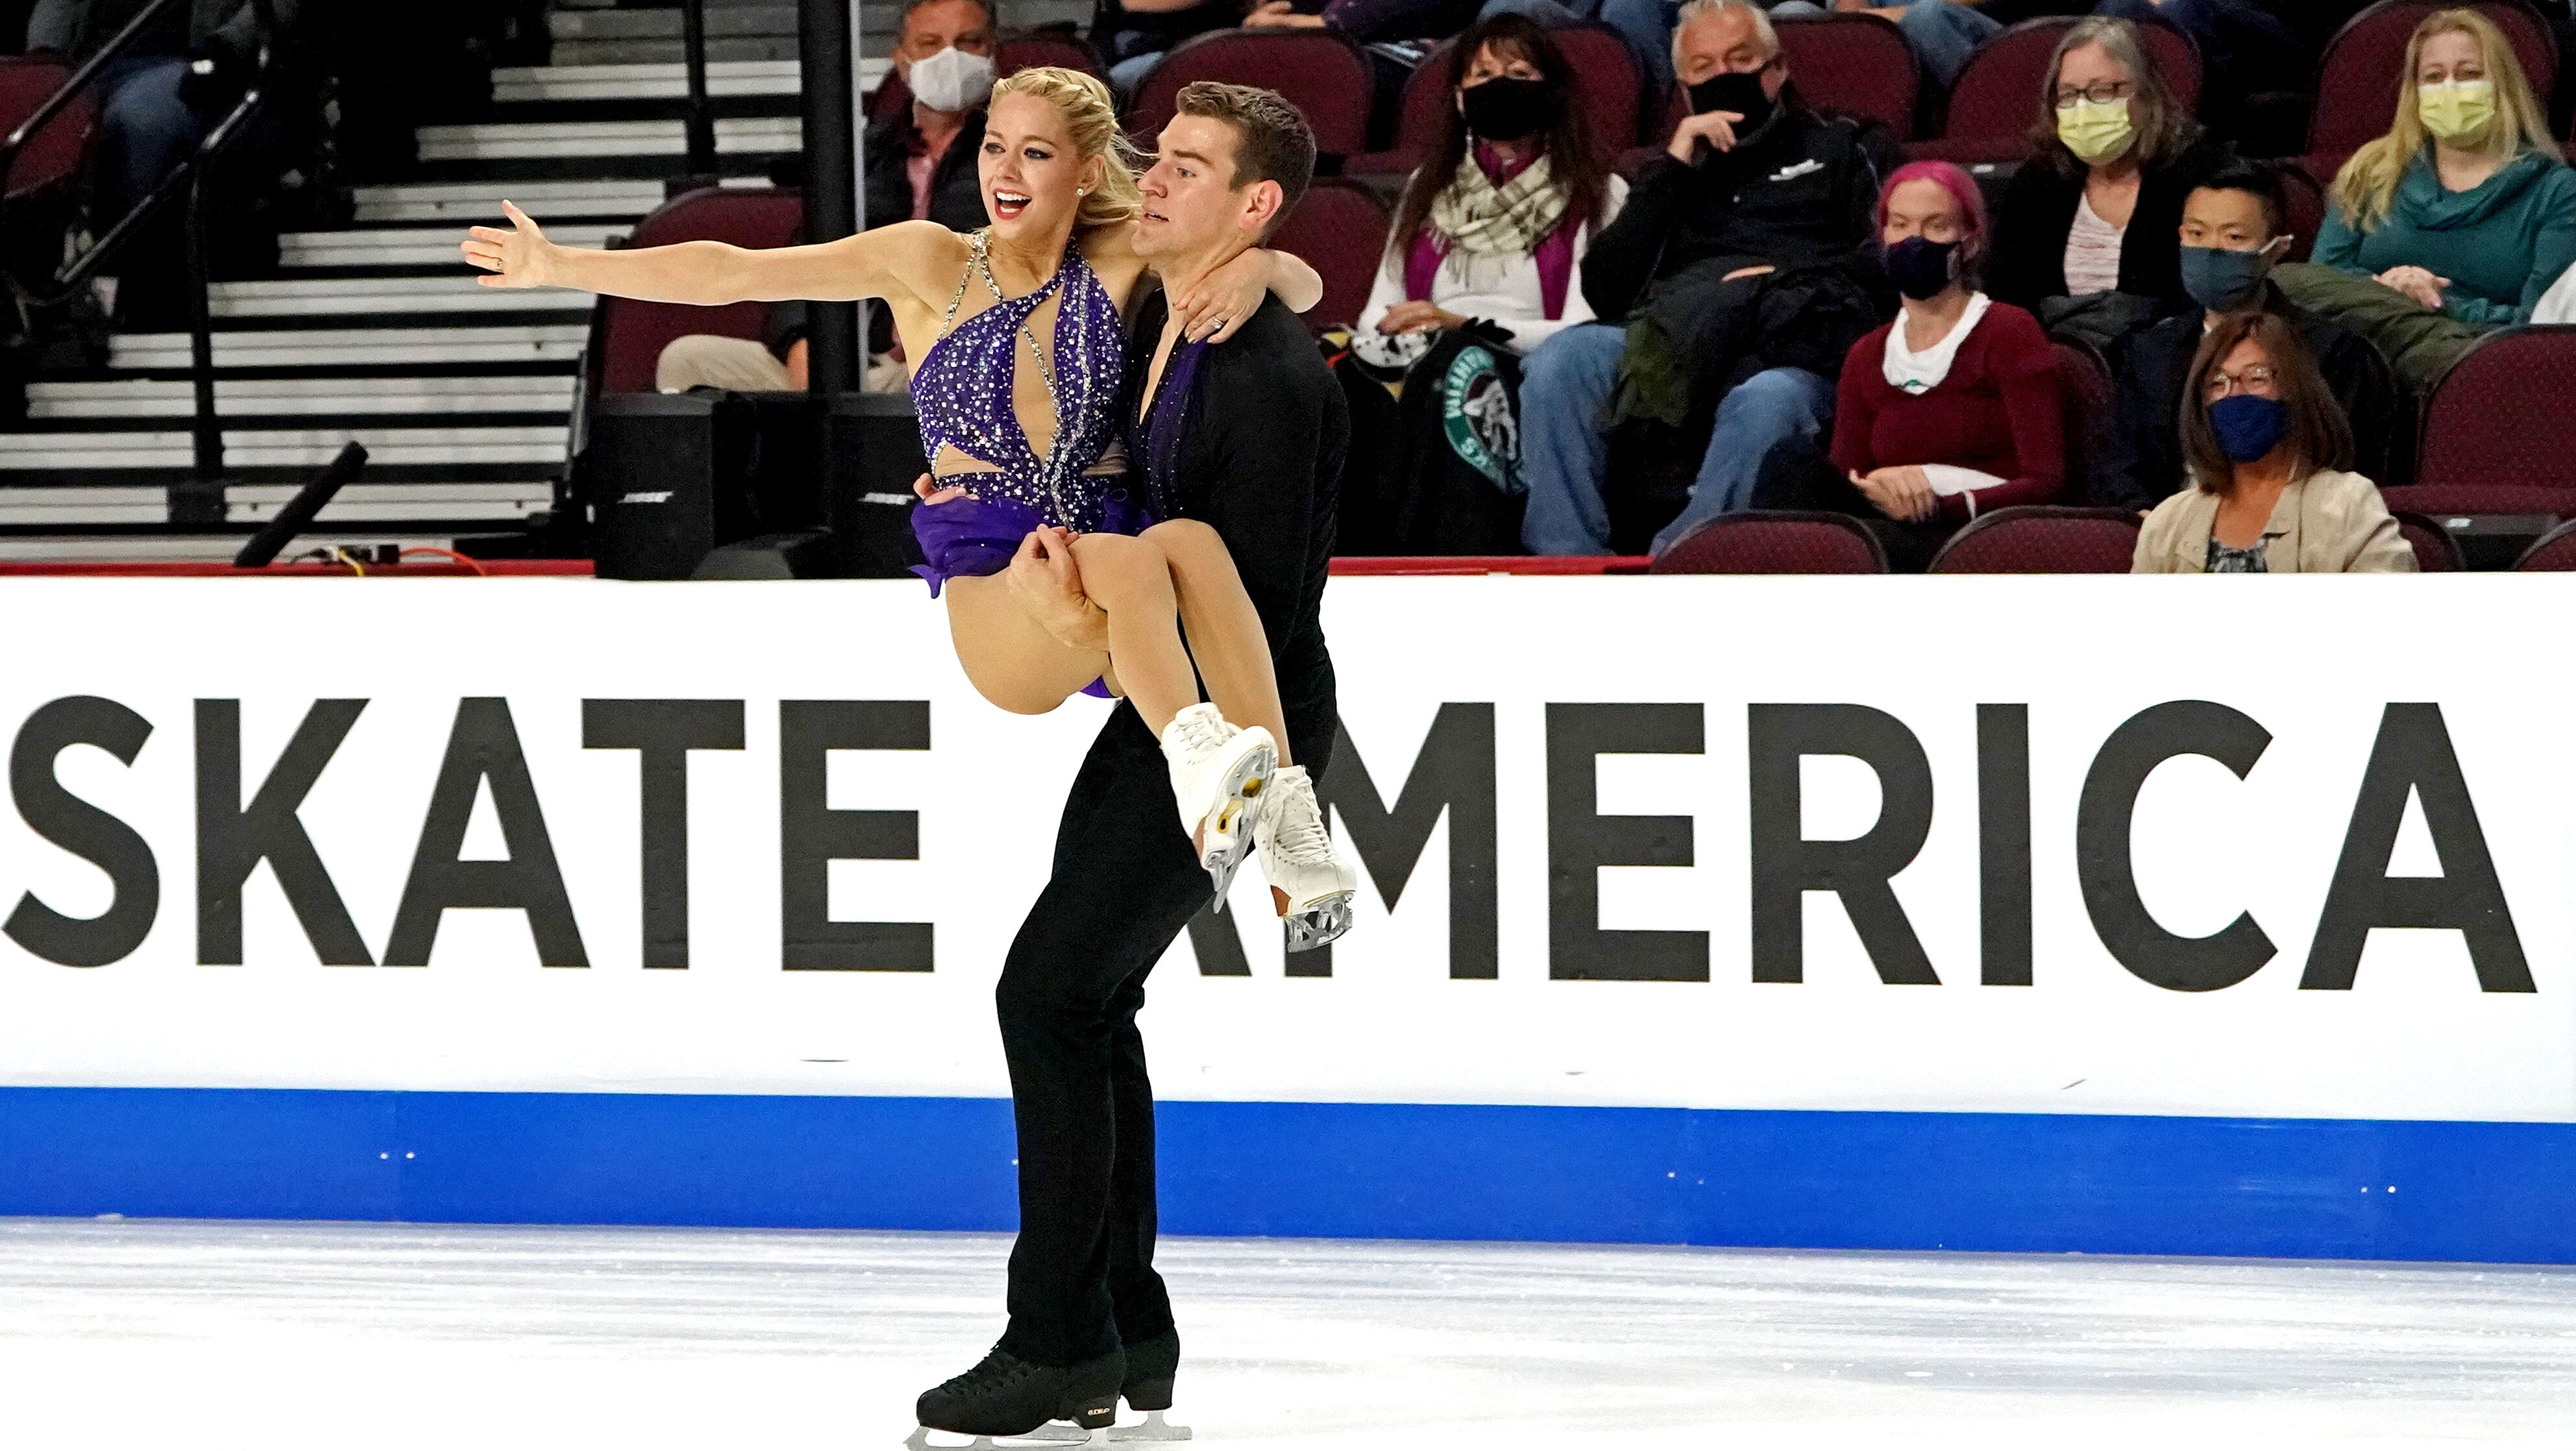 How to watch Alexa Knierim and Brandon Frazier at the 2022 Winter Olympics on NBC and Peacock